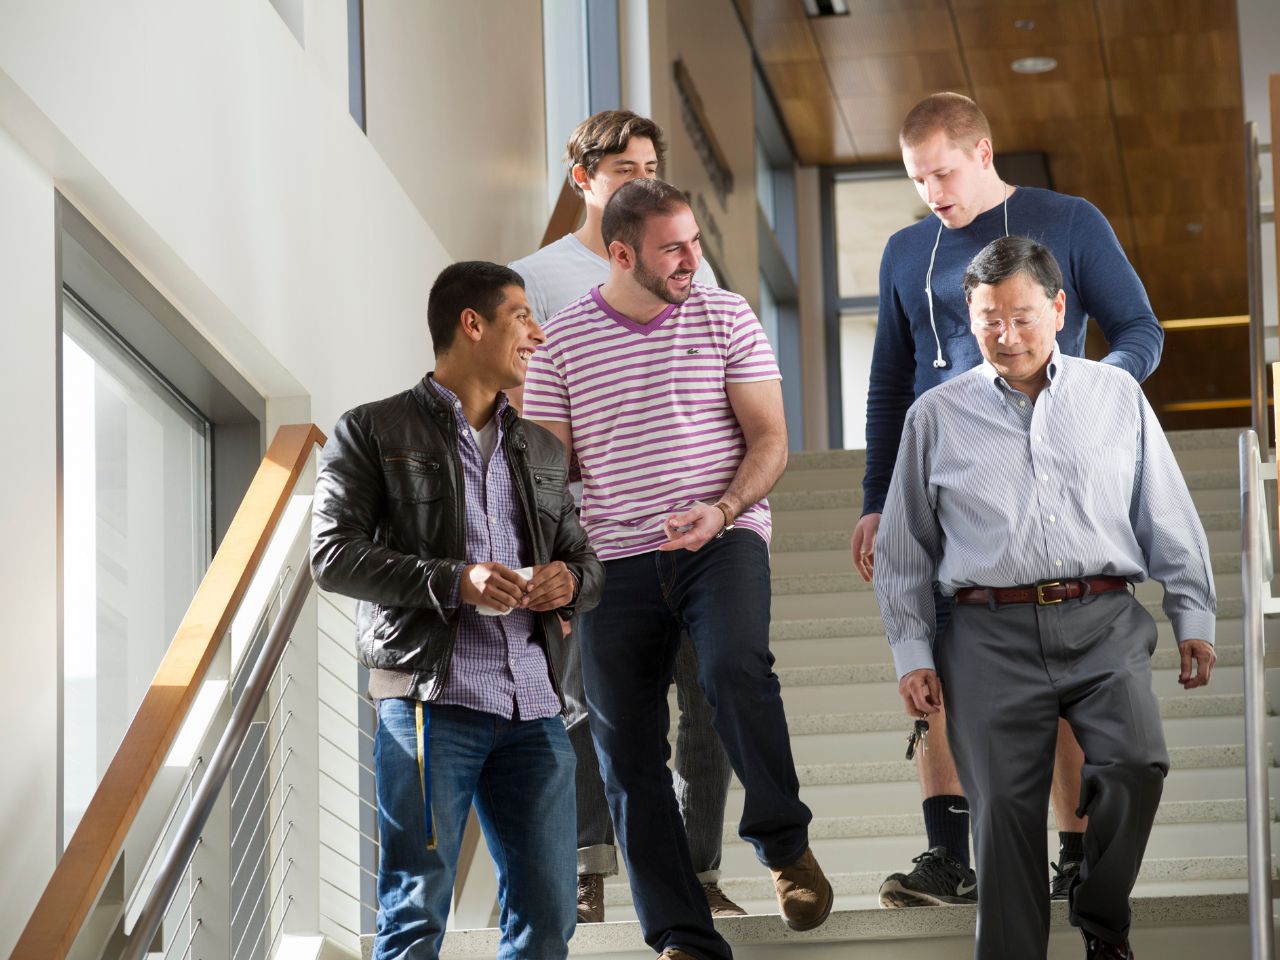 A group of four students and ˽̳ Davis School of Law Professor Clay Tanaka laugh and converse while descending the stairs in King Hall.